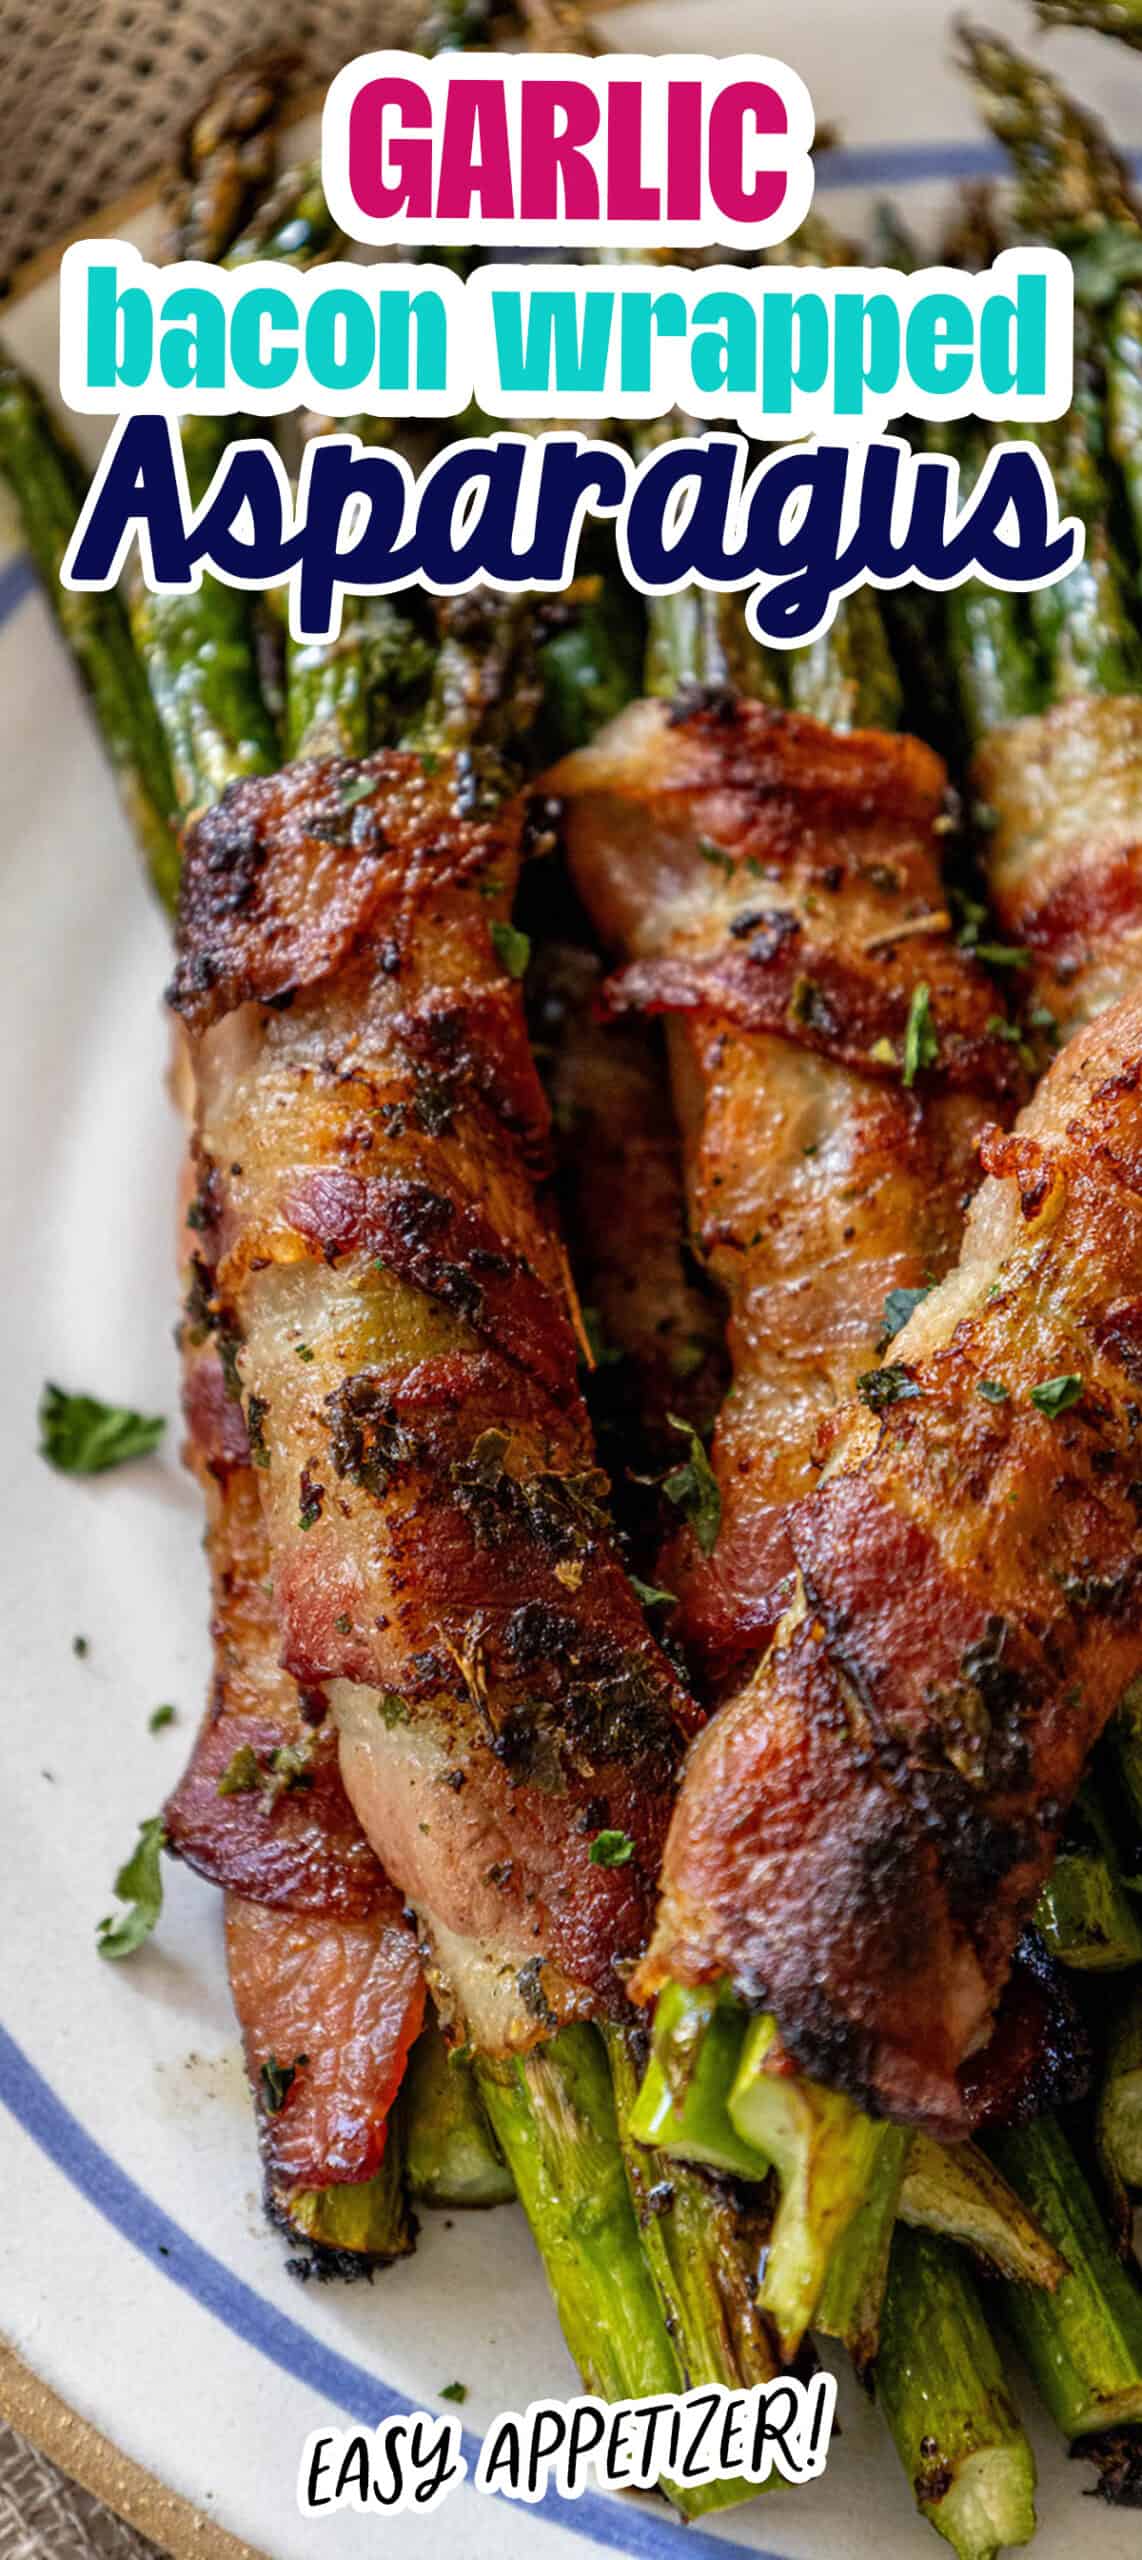 Garlic bacon wrapped asparagus is a delicious and savory appetizer that combines the natural flavors of garlic, asparagus, and bacon.